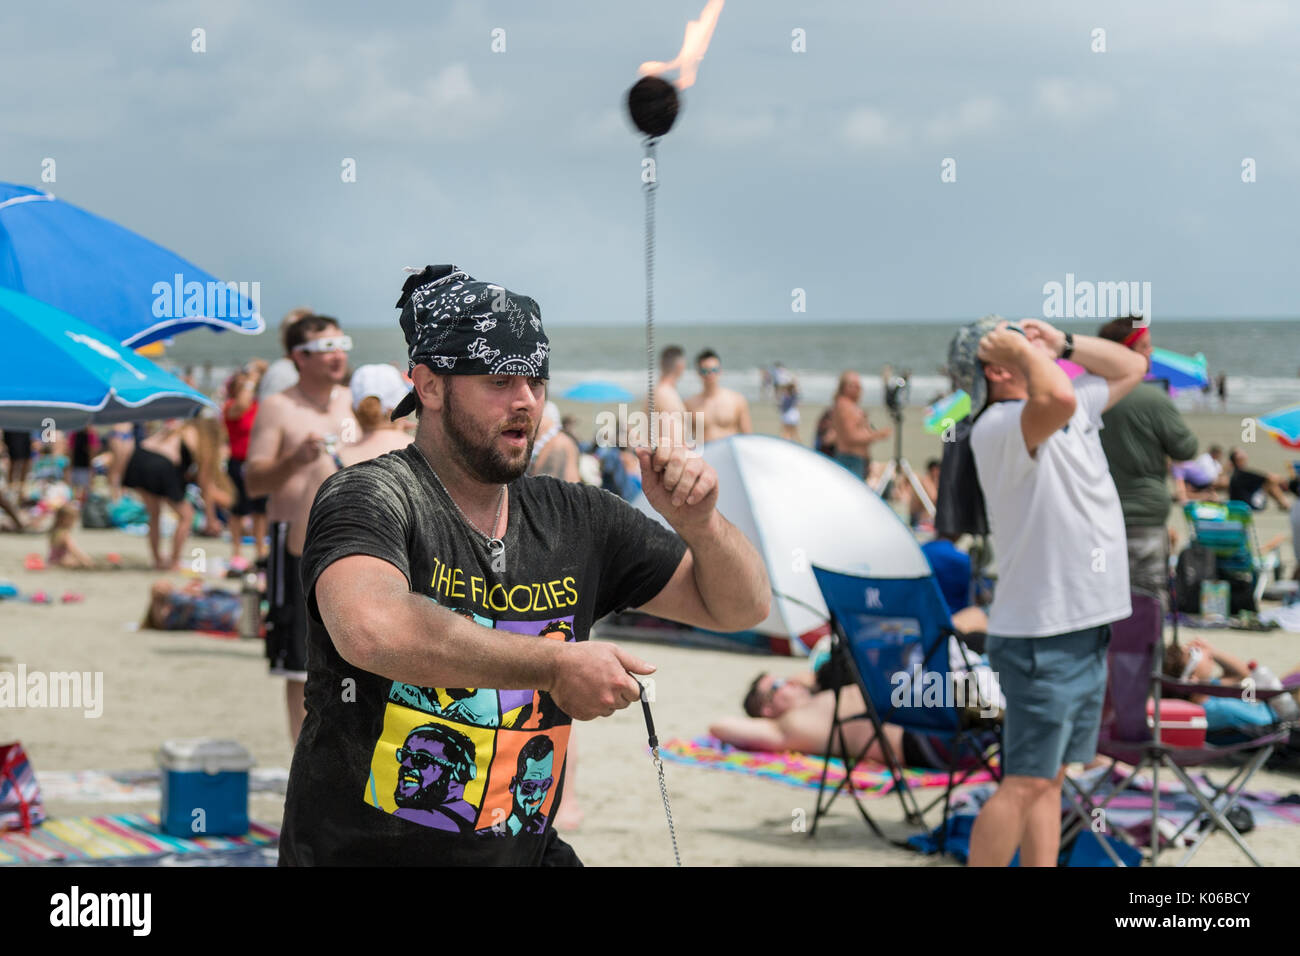 Charleston, Isle of Palms, USA. 21st Aug, 2017. A man twirls fireballs as the total solar eclipse passes over the beach outside Charleston August 21, 2017 in Isle of Palms, South Carolina. The solar eclipse after sweeping across the nation crosses the Charleston area before heading over the Atlantic Ocean. Credit: Planetpix/Alamy Live News Stock Photo